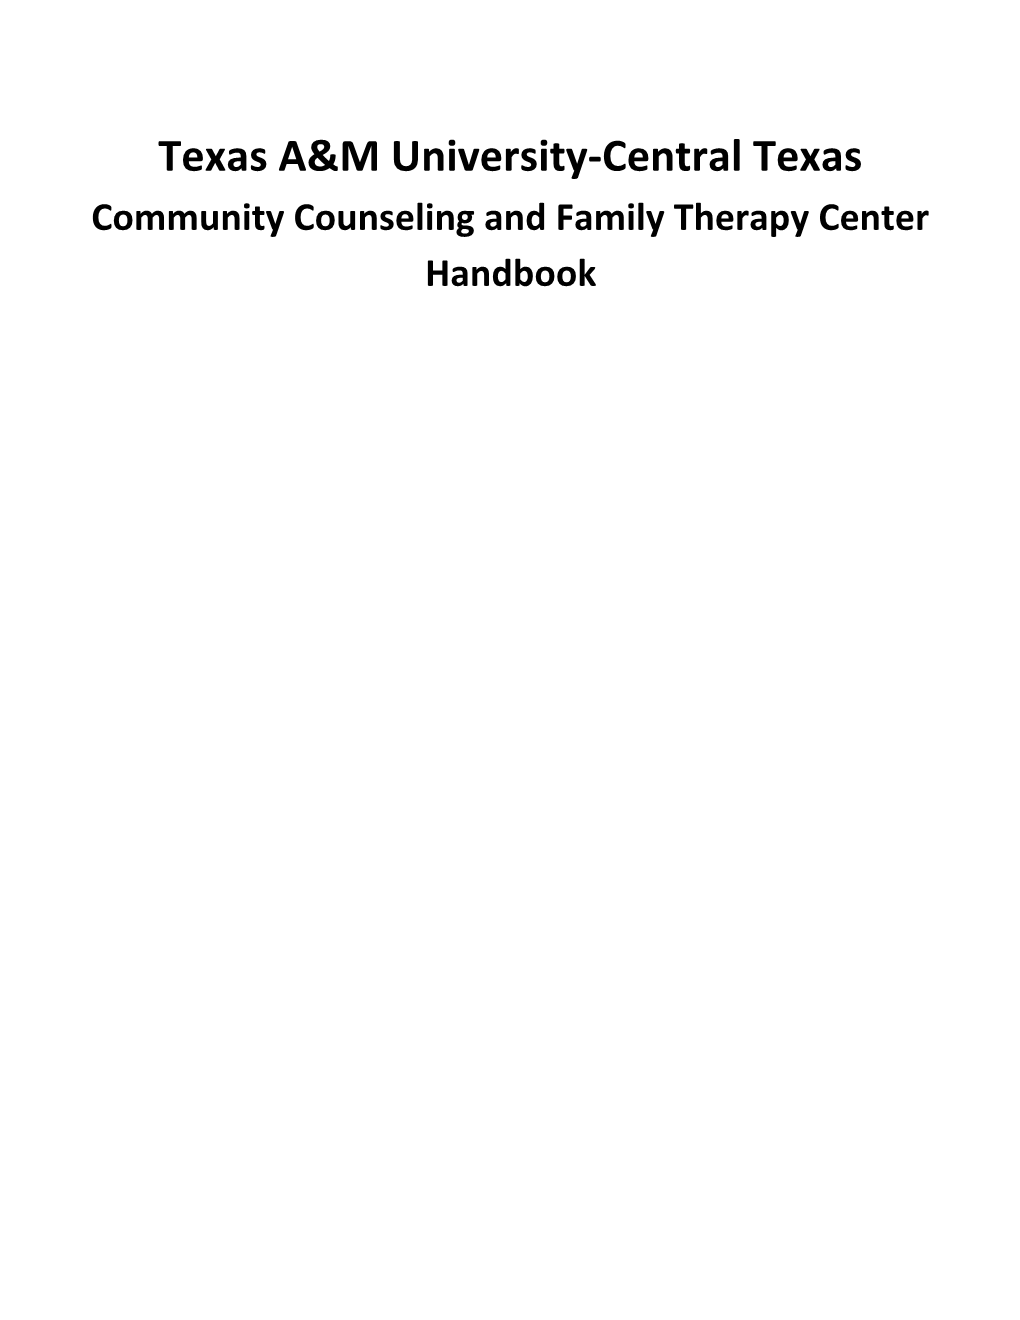 Community Counseling and Family Therapy Center Handbook